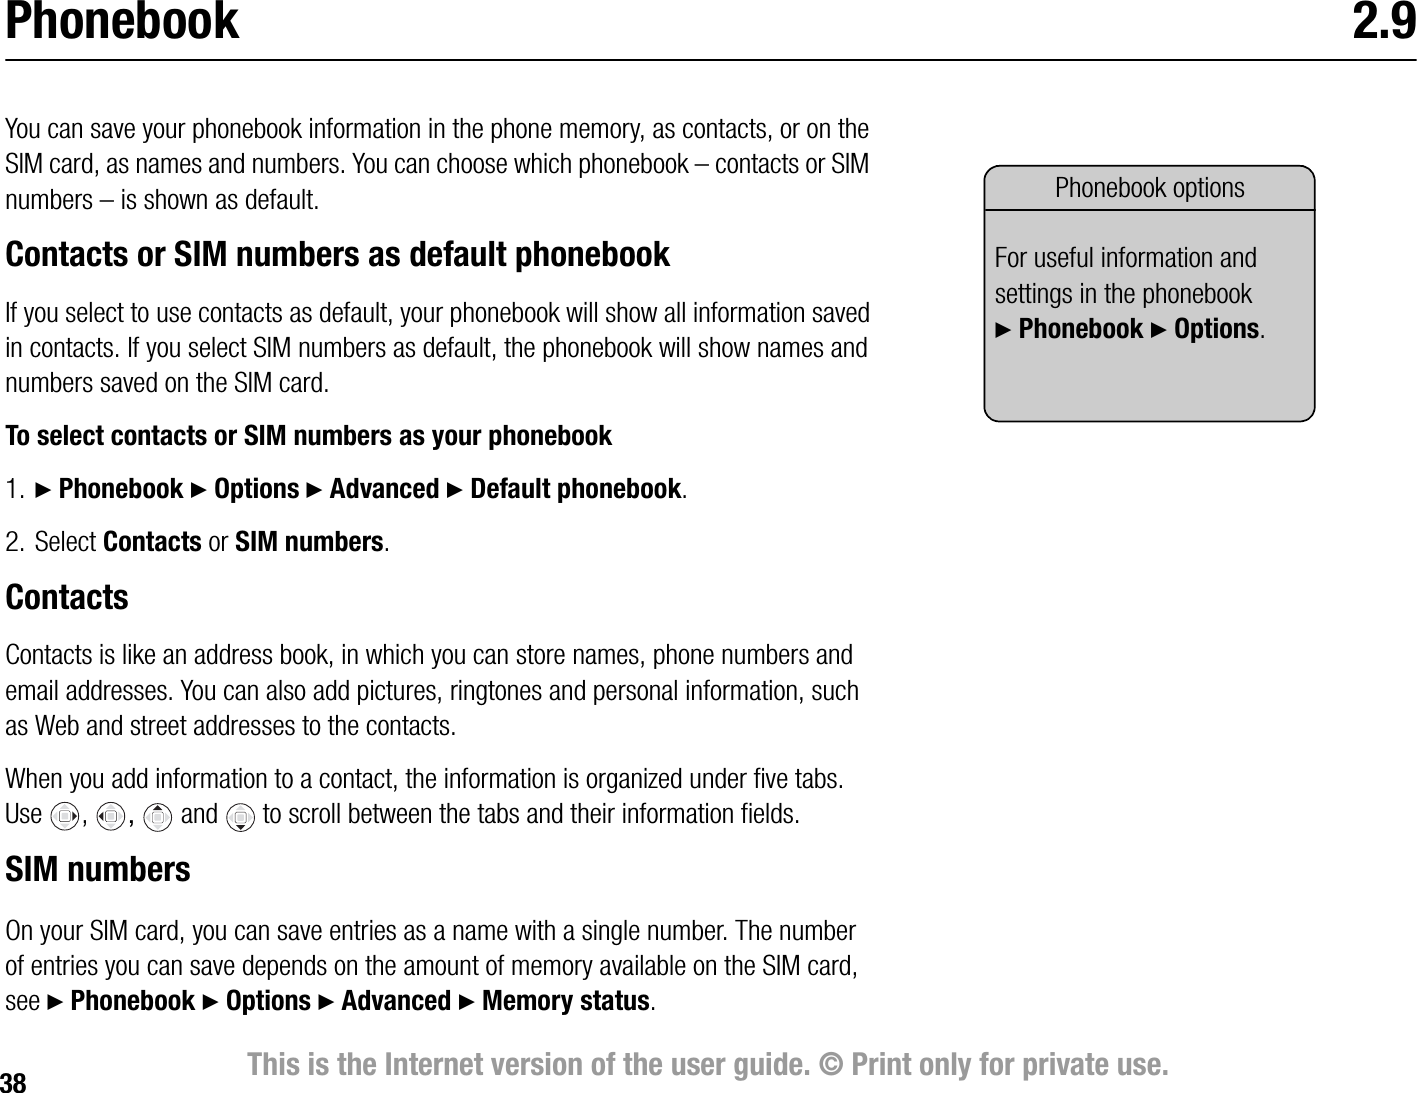 38 This is the Internet version of the user guide. © Print only for private use.Phonebook 2.9You can save your phonebook information in the phone memory, as contacts, or on the SIM card, as names and numbers. You can choose which phonebook – contacts or SIM numbers – is shown as default.Contacts or SIM numbers as default phonebookIf you select to use contacts as default, your phonebook will show all information saved in contacts. If you select SIM numbers as default, the phonebook will show names and numbers saved on the SIM card.To select contacts or SIM numbers as your phonebook1. } Phonebook } Options } Advanced } Default phonebook.2. Select Contacts or SIM numbers.ContactsContacts is like an address book, in which you can store names, phone numbers and email addresses. You can also add pictures, ringtones and personal information, such as Web and street addresses to the contacts.When you add information to a contact, the information is organized under five tabs. Use ,  and to scroll between the tabs and their information fields.SIM numbersOn your SIM card, you can save entries as a name with a single number. The number of entries you can save depends on the amount of memory available on the SIM card, see } Phonebook } Options } Advanced } Memory status.Phonebook optionsFor useful information and settings in the phonebook }Phonebook } Options.